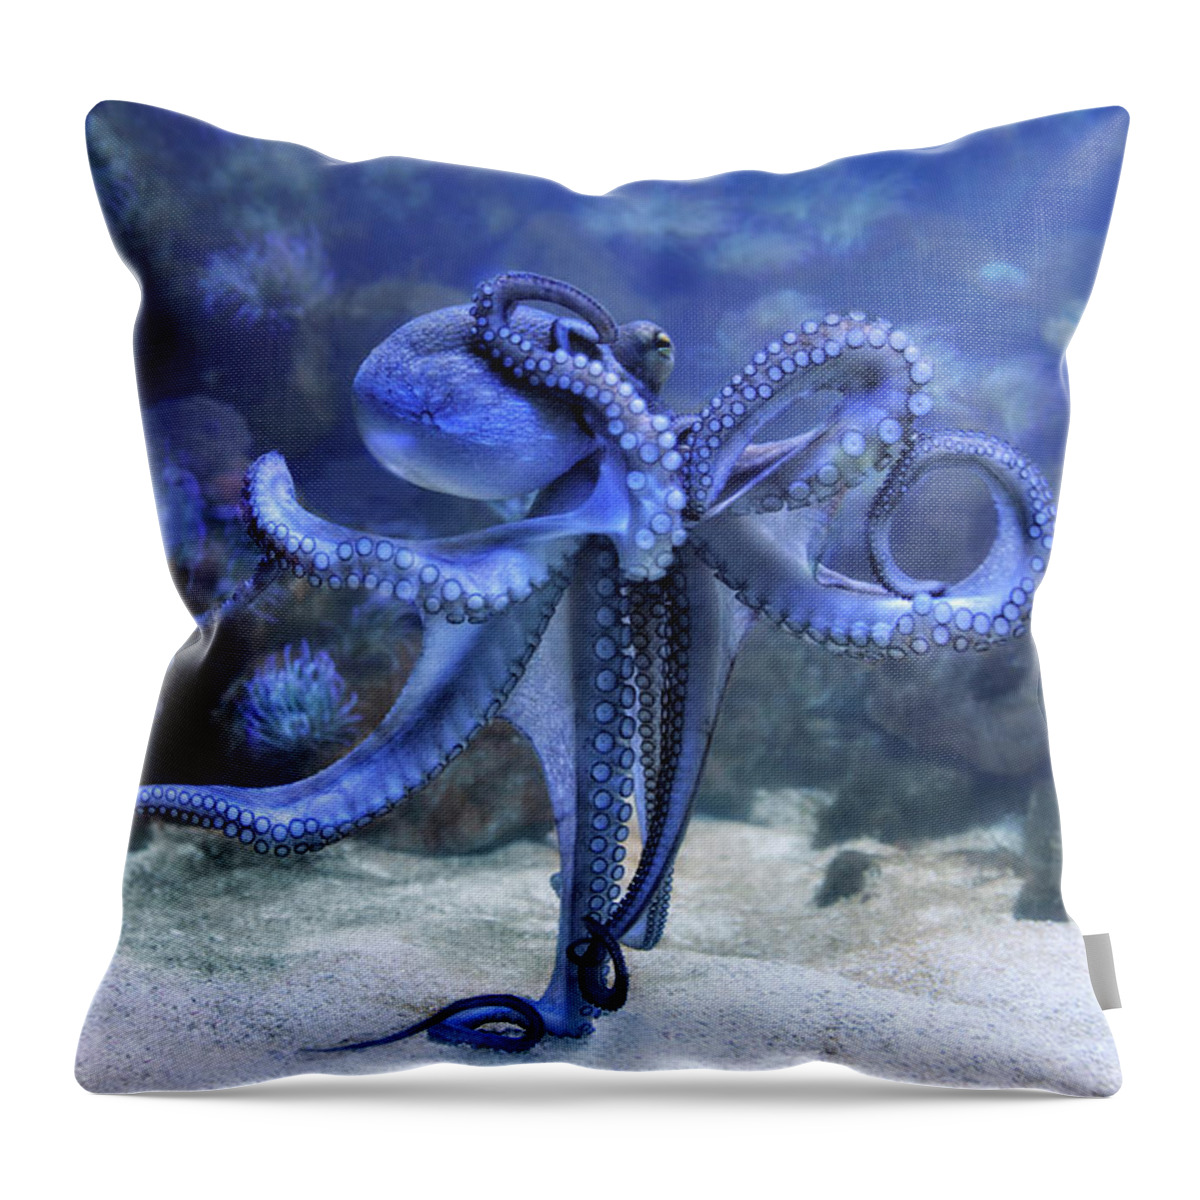 Animals Throw Pillow featuring the photograph The Octopus by Joachim G Pinkawa